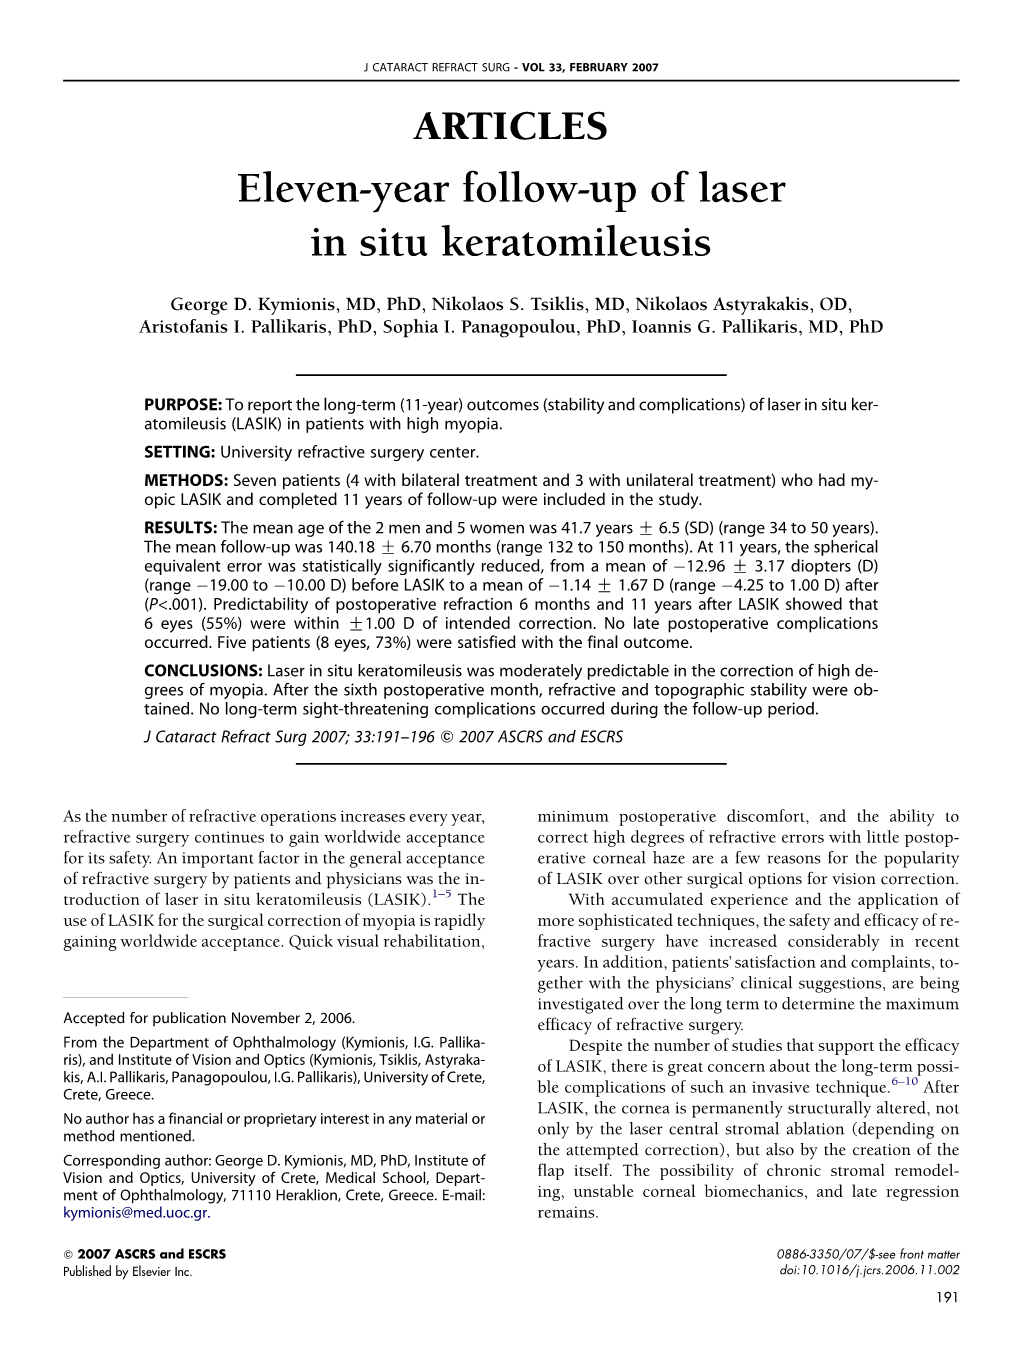 Eleven-Year Follow-Up of Laser in Situ Keratomileusis